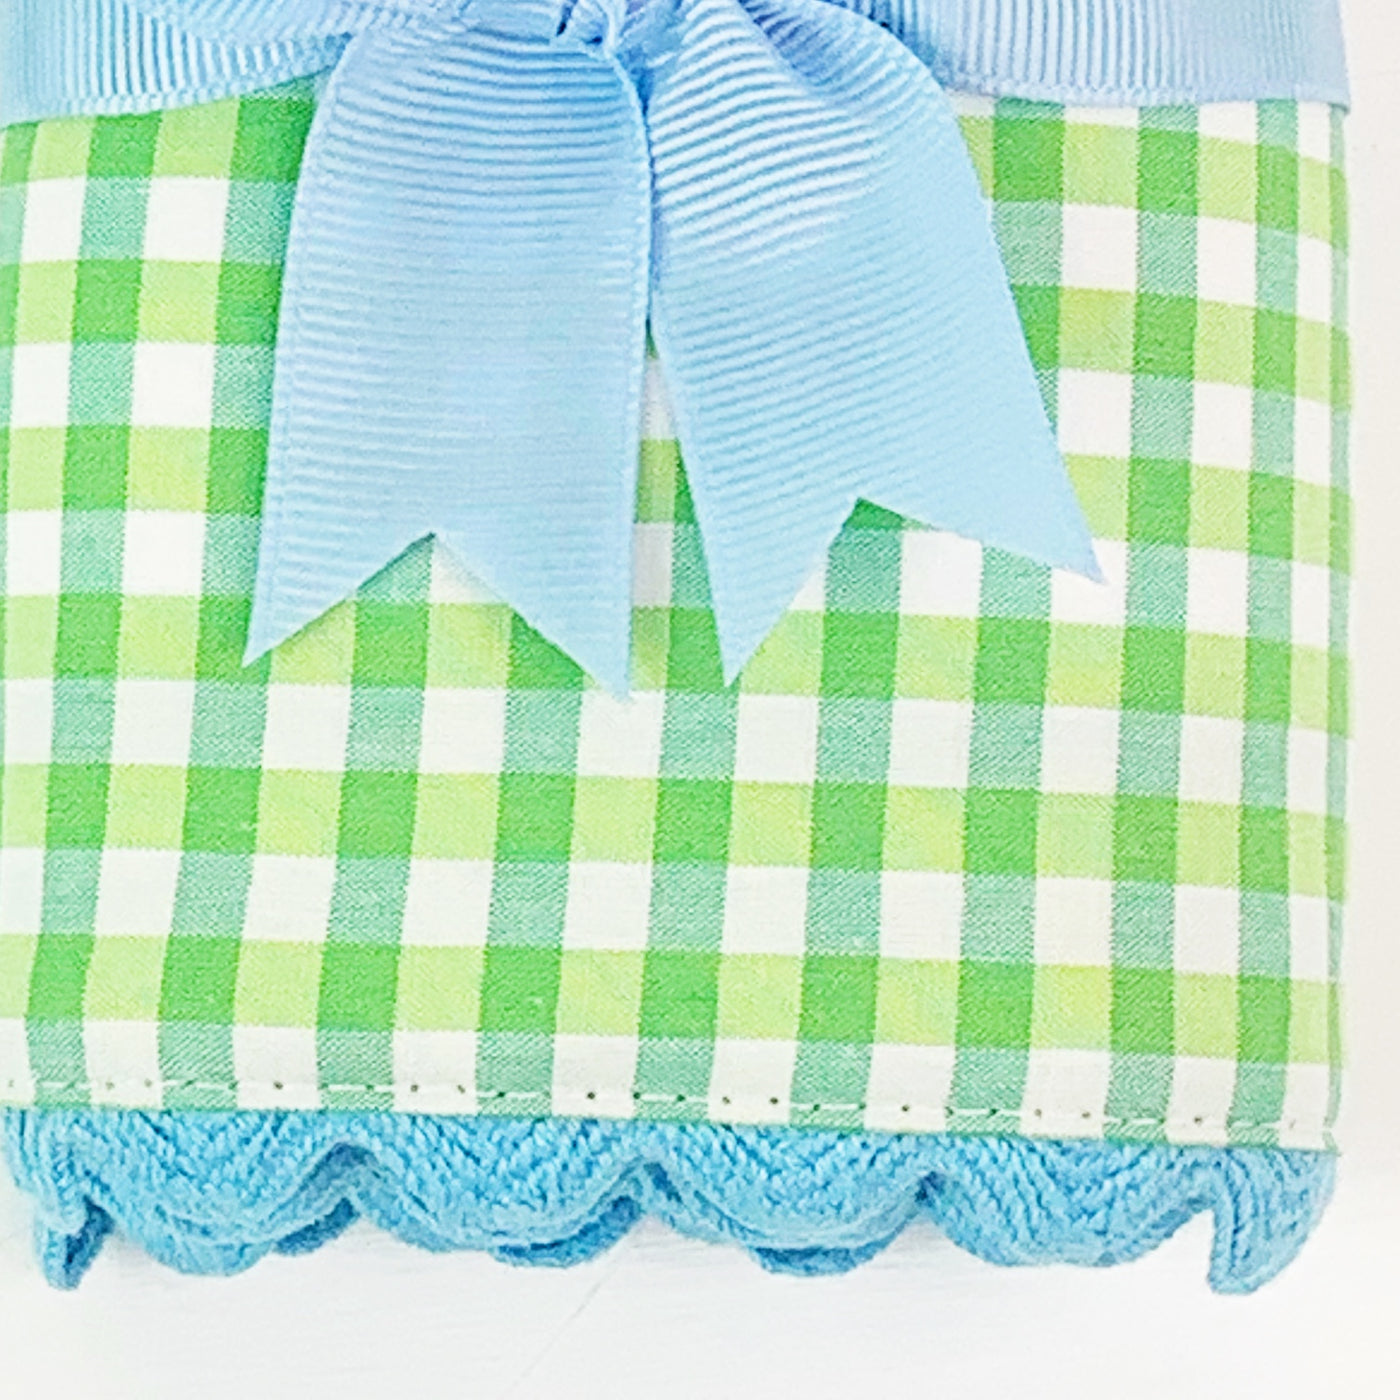 Green Gingham with Blue trim Burp by 3 Marthas